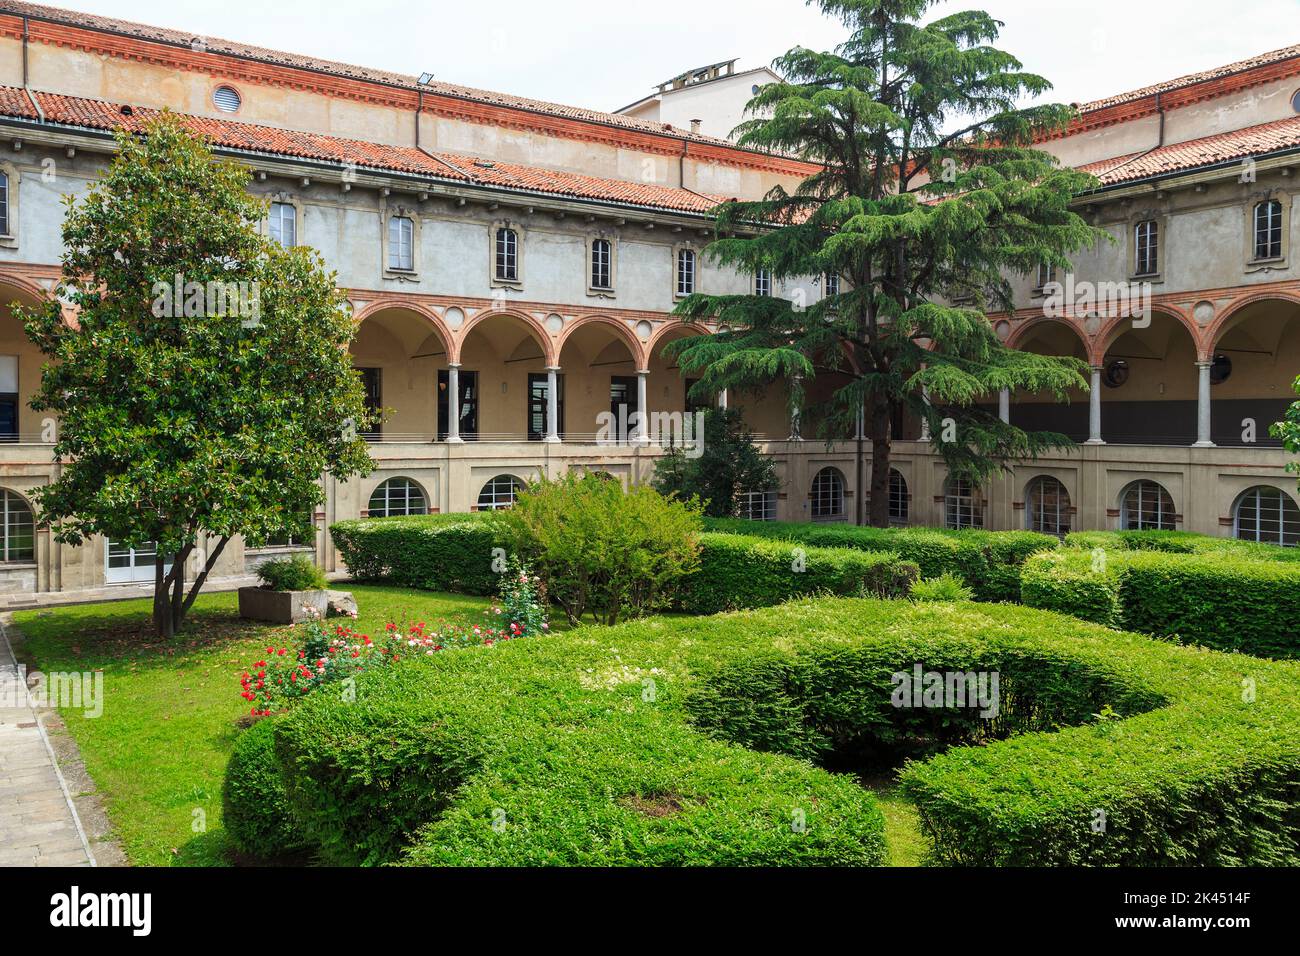 MILAN, ITALY - MAY 19, 2018: It is a cloister of the former medieval Benedictine monastery, in which the Museum of Science and Technology of Leonardo Stock Photo